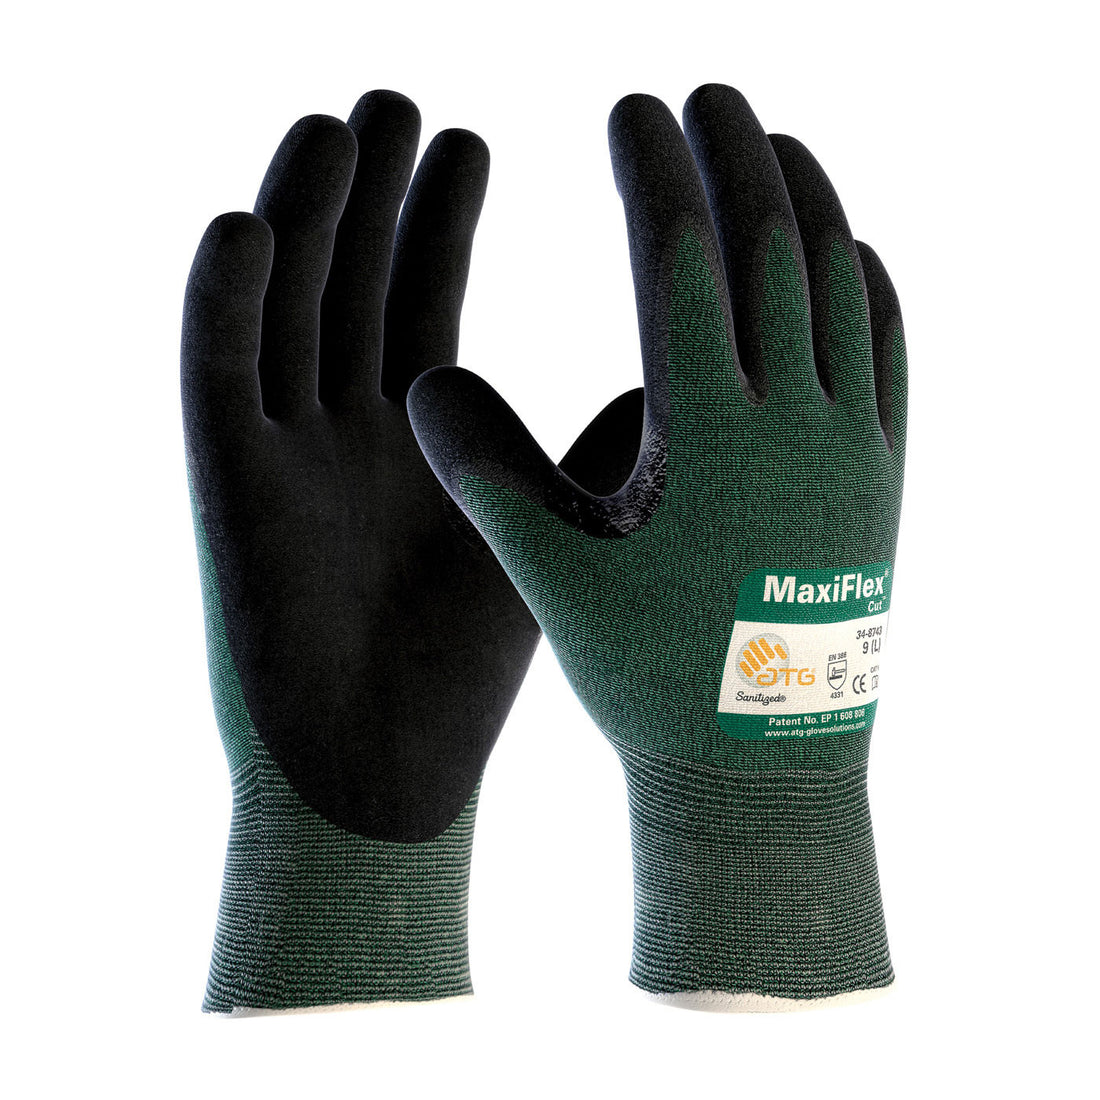 Are Glove Coatings Cut Resistant?